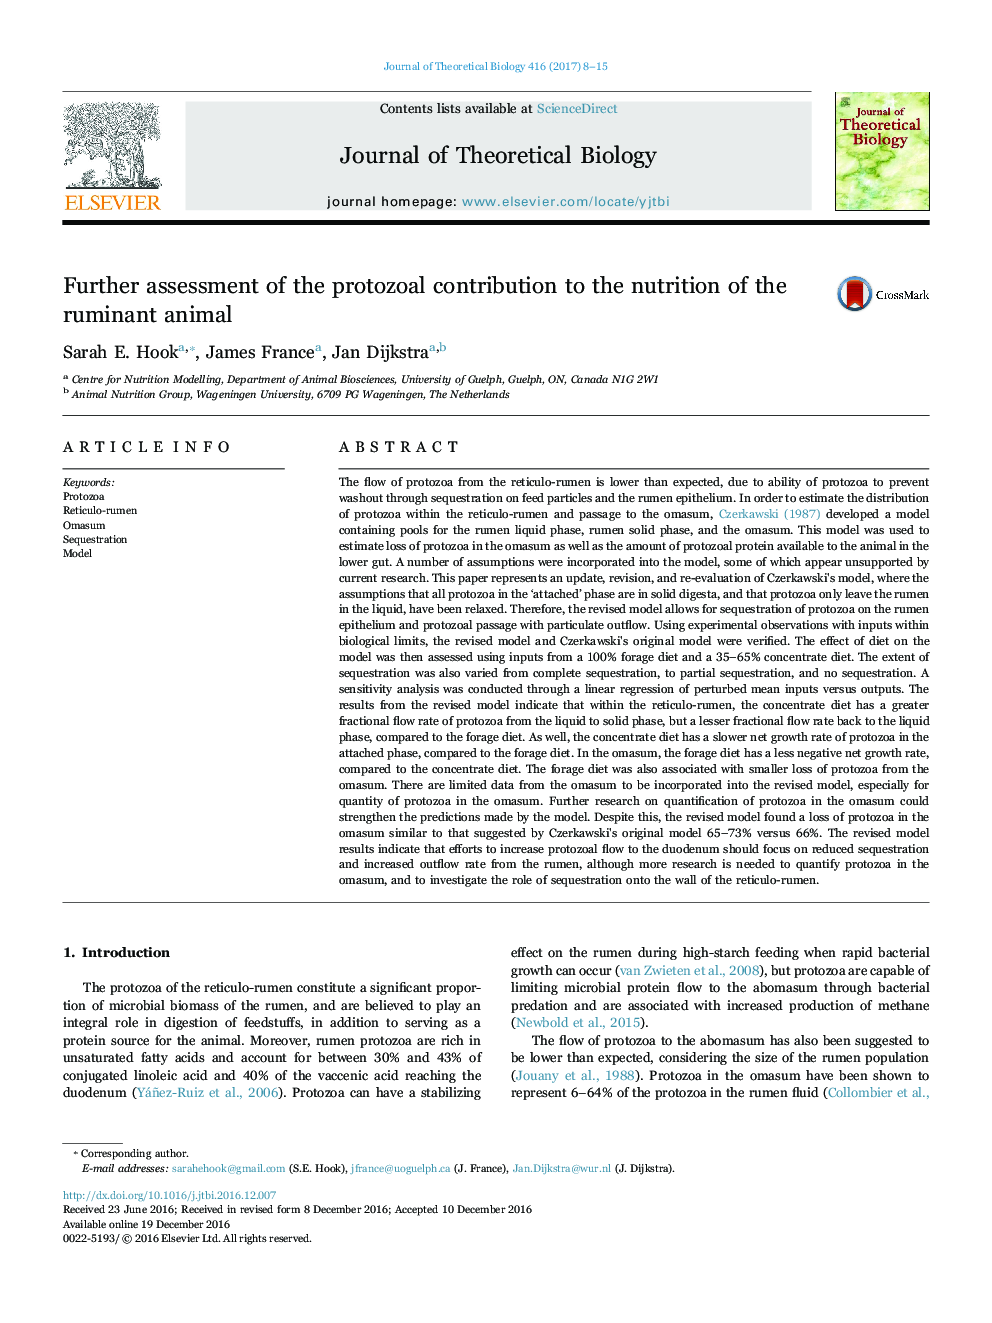 Further assessment of the protozoal contribution to the nutrition of the ruminant animal